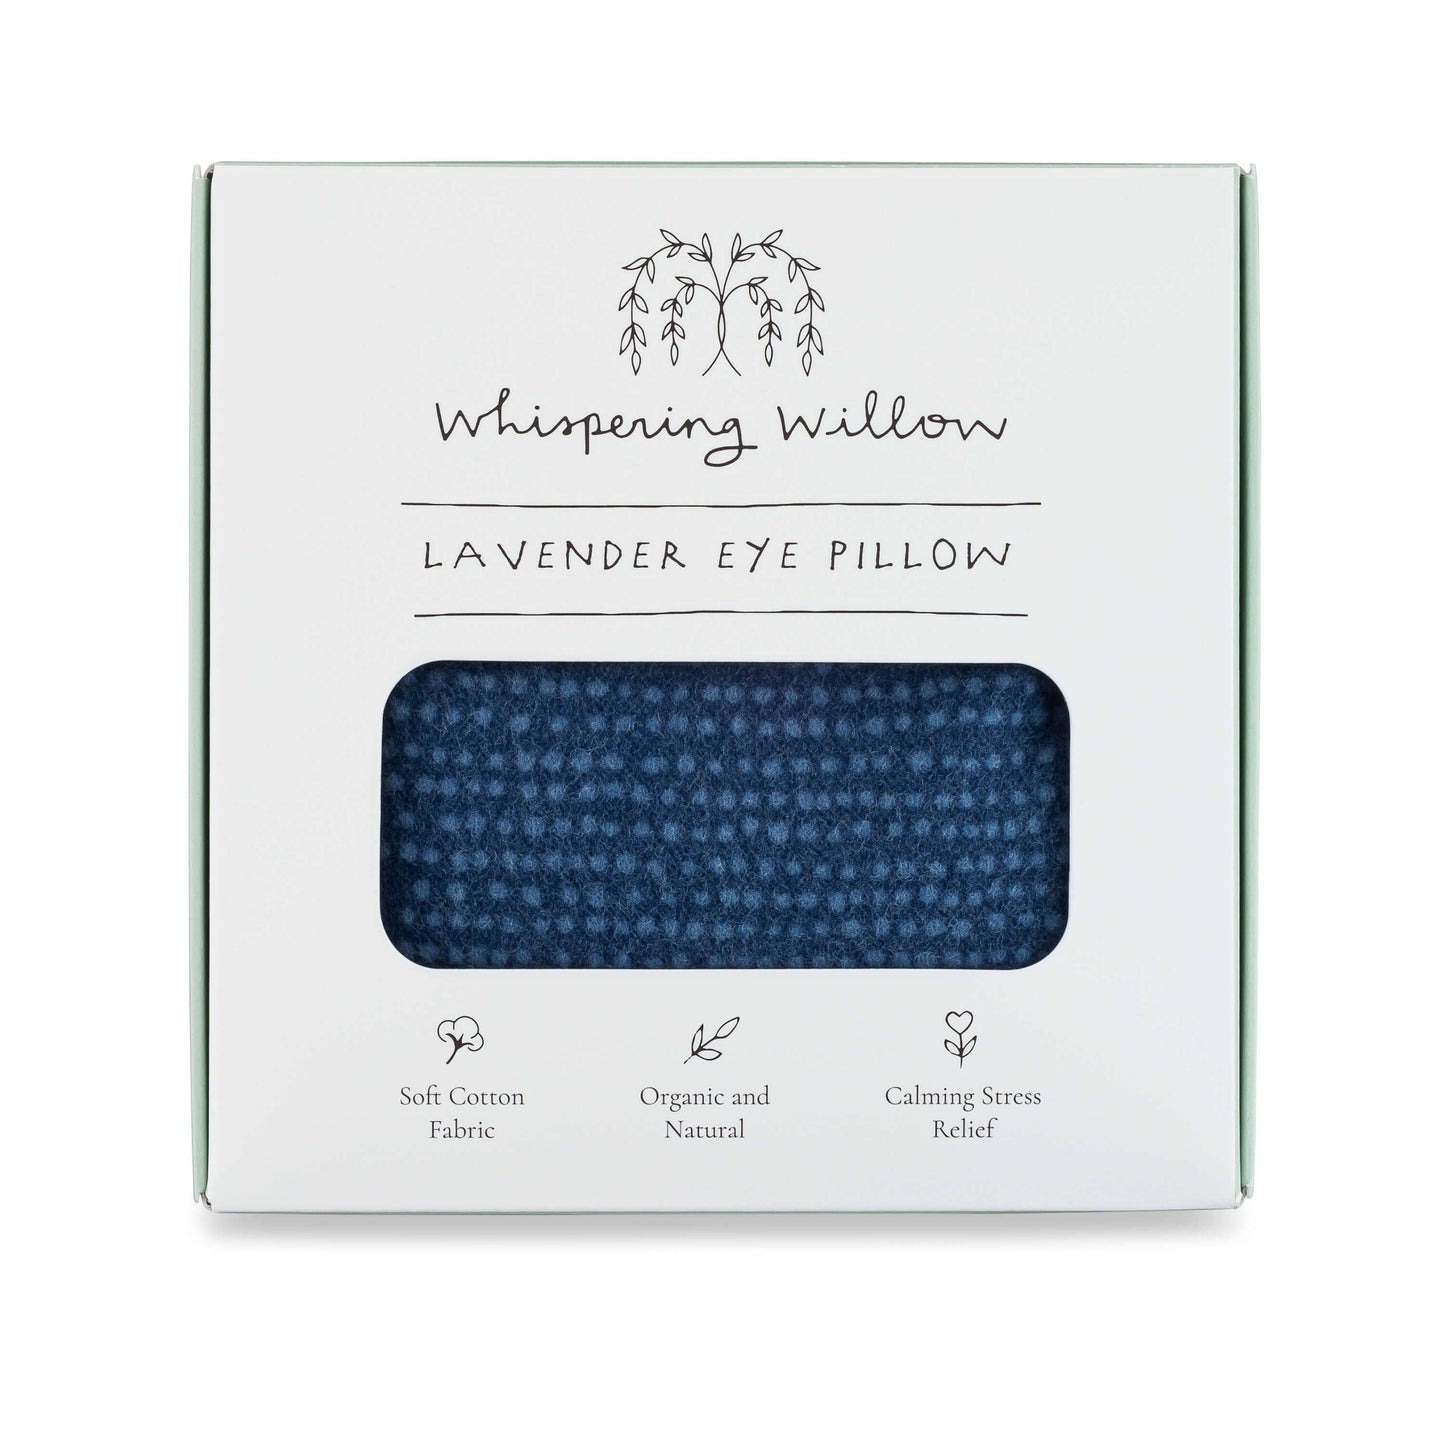 Whispering Willow - Eye Pillow, Lavender - Deep Blue - Boxed